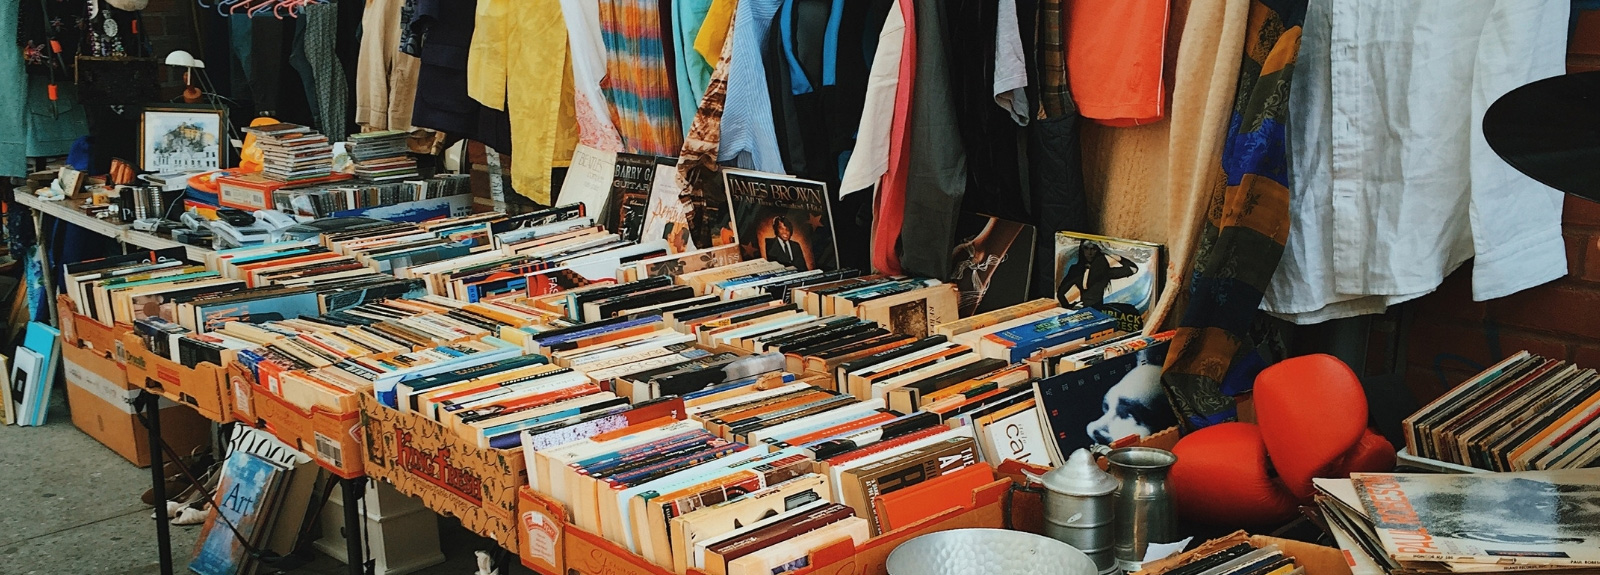 Best Second-hand and Charity Shops Close to the Main Campus